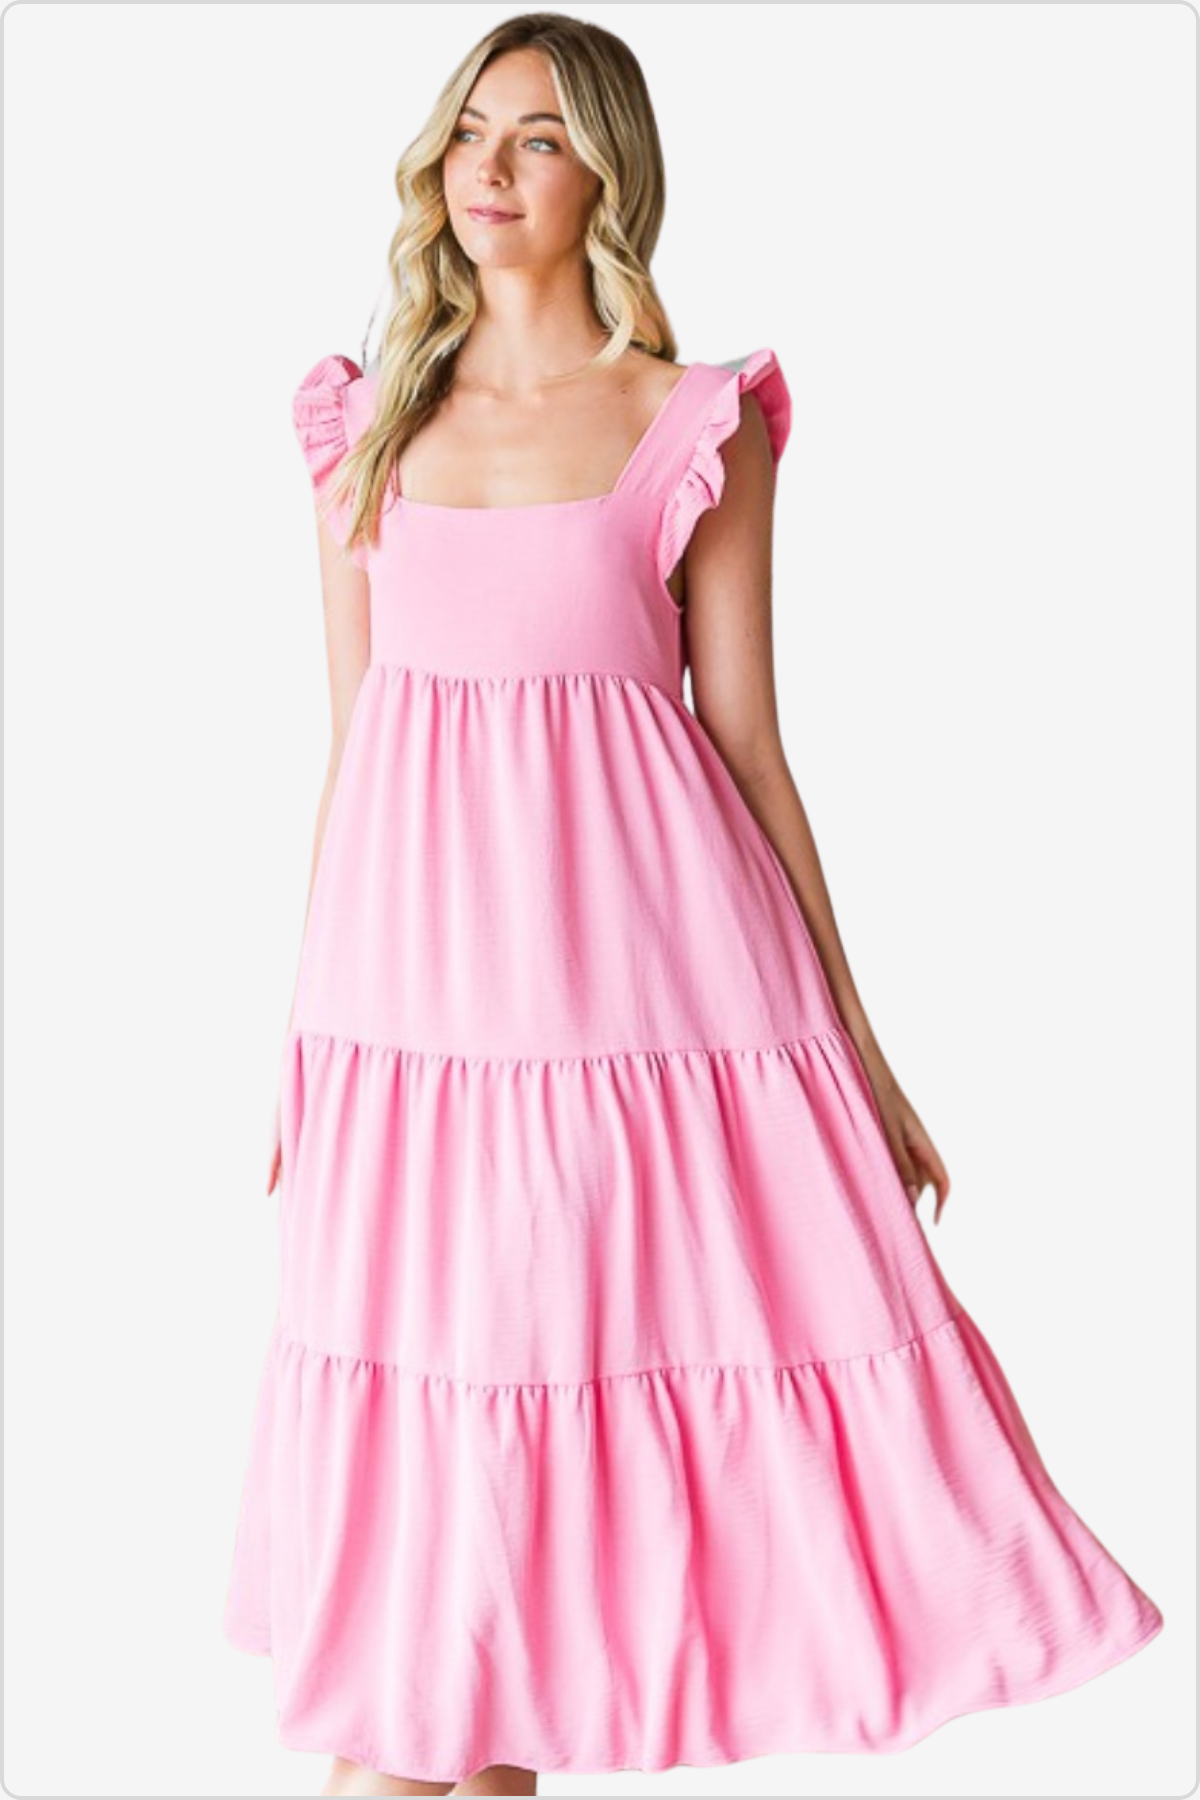 Light pink summer dress with ruffle sleeves and tiered skirt, styled with simple white sandals, perfect for a sunny day out.